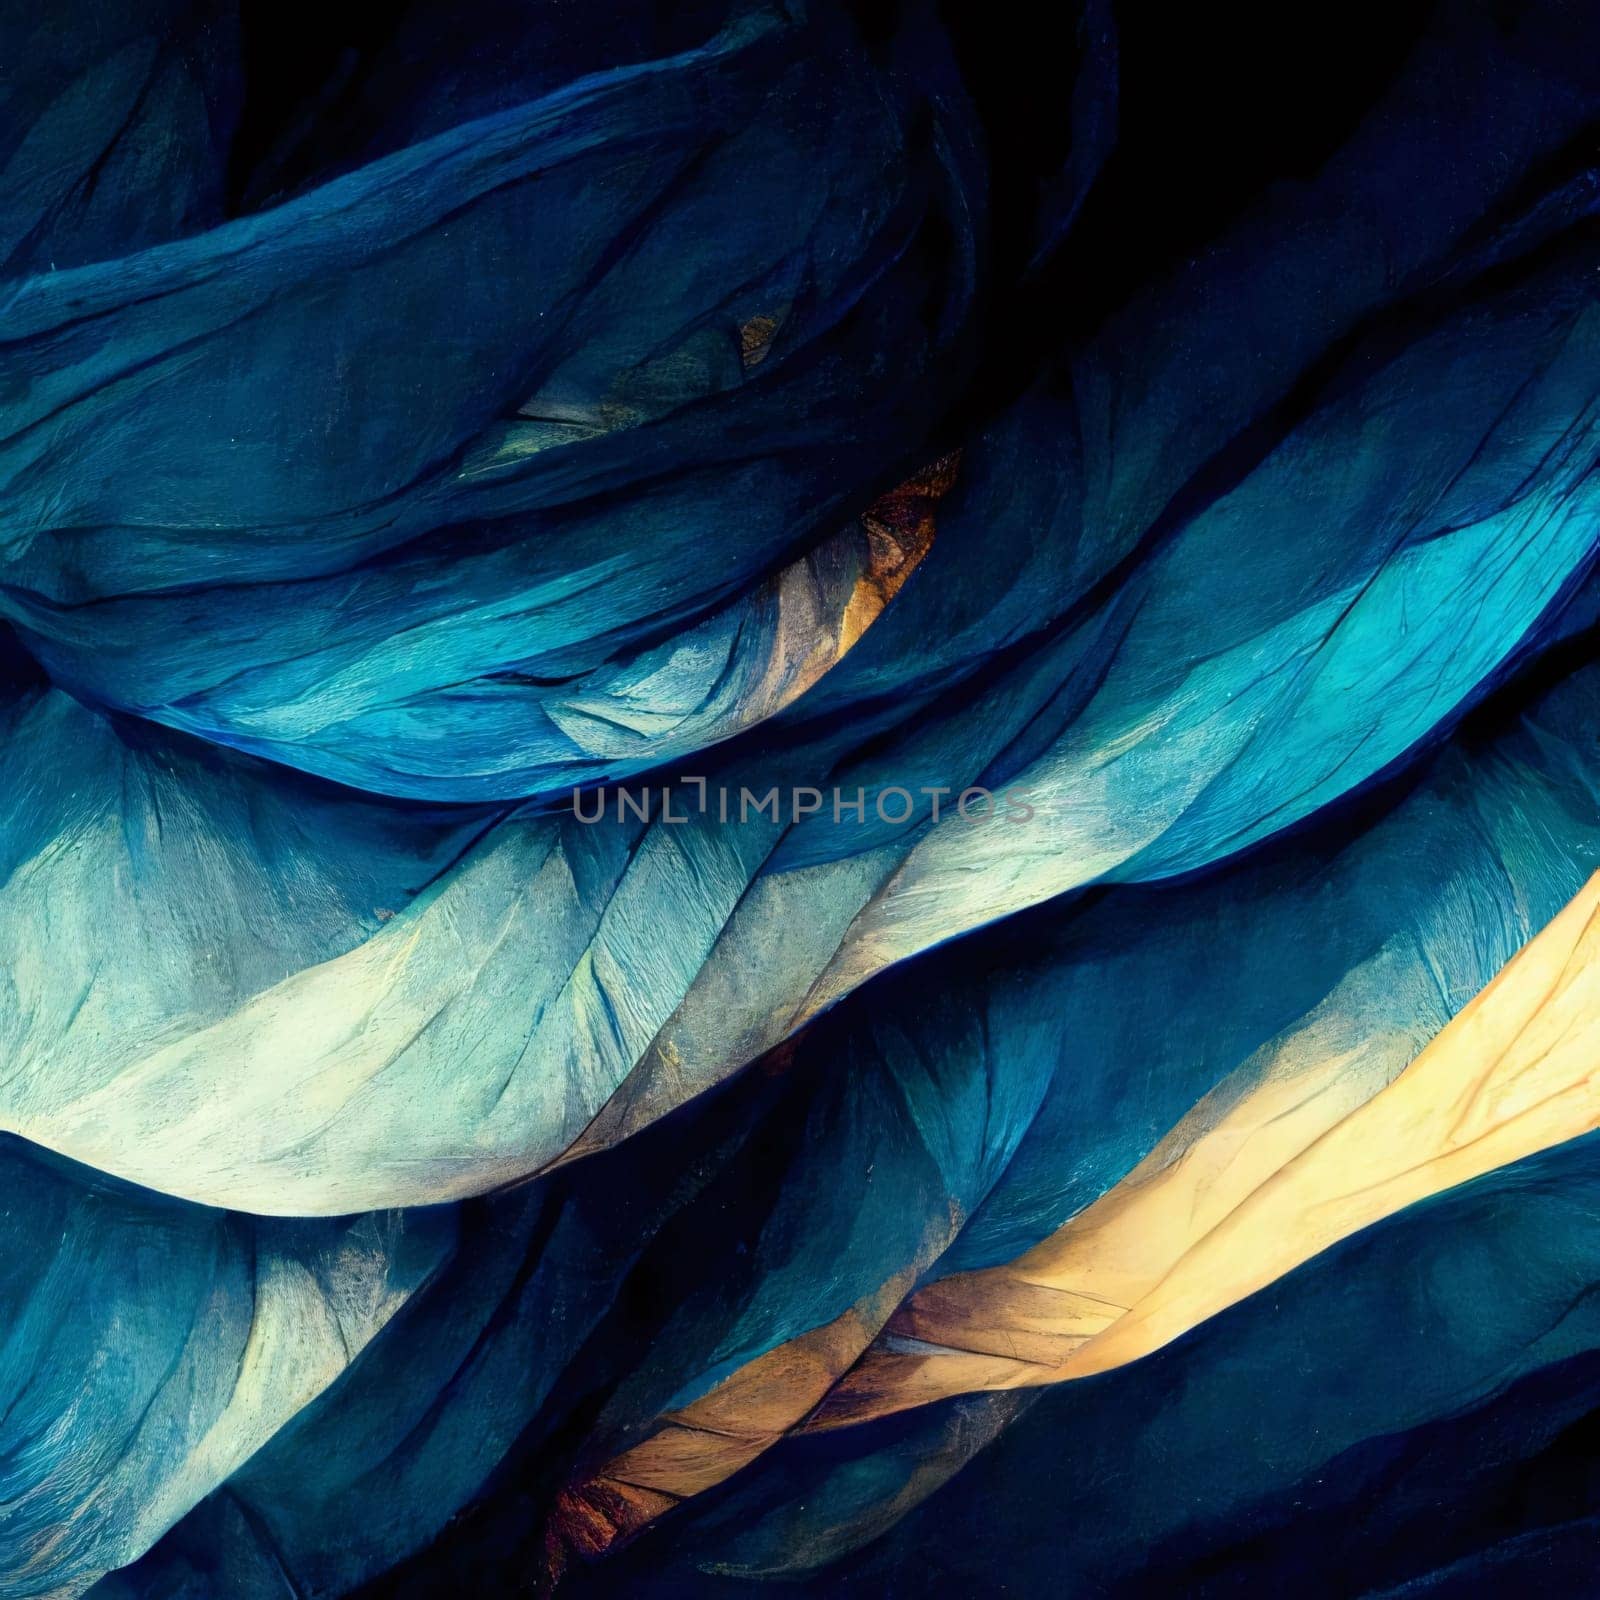 Abstract background design: abstract background with blue and yellow crumpled fabric on black